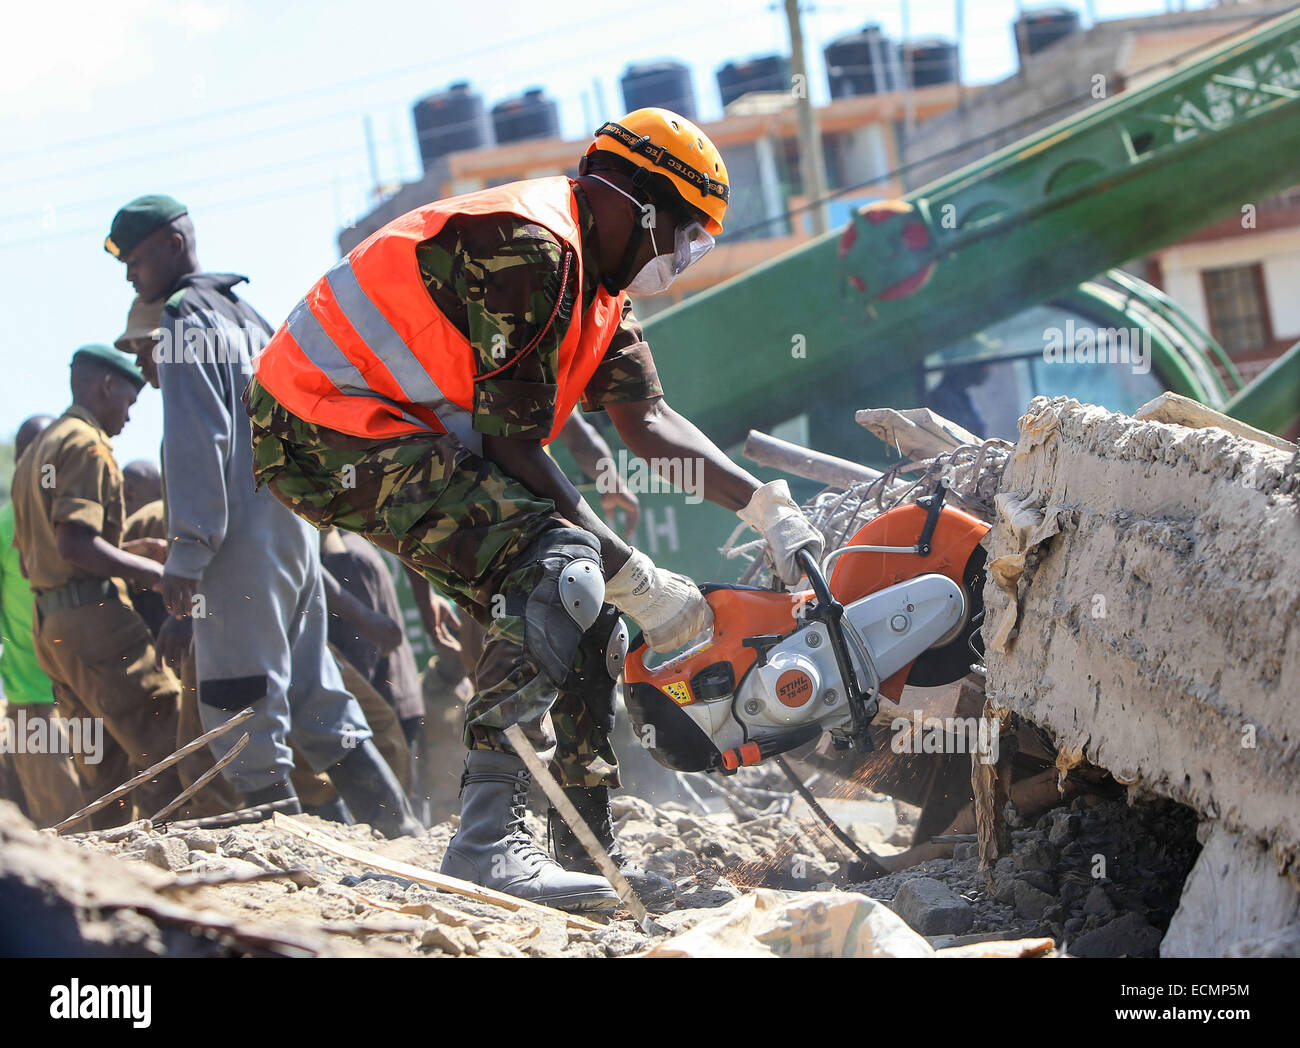 Nairobi, Kenya. 17th Dec, 2014. A rescuer tries to cut floorslab of a collapsed residential building in Nairobi, capital of Kenya, Dec. 17, 2014. According to Kenya Red Cross staff, the building collapsed at around 2 a.m. on Wednesday. The number of people get trapped is unconfirmed. Rescue work is still underway. Credit:  Meng Chenguang/Xinhua/Alamy Live News Stock Photo